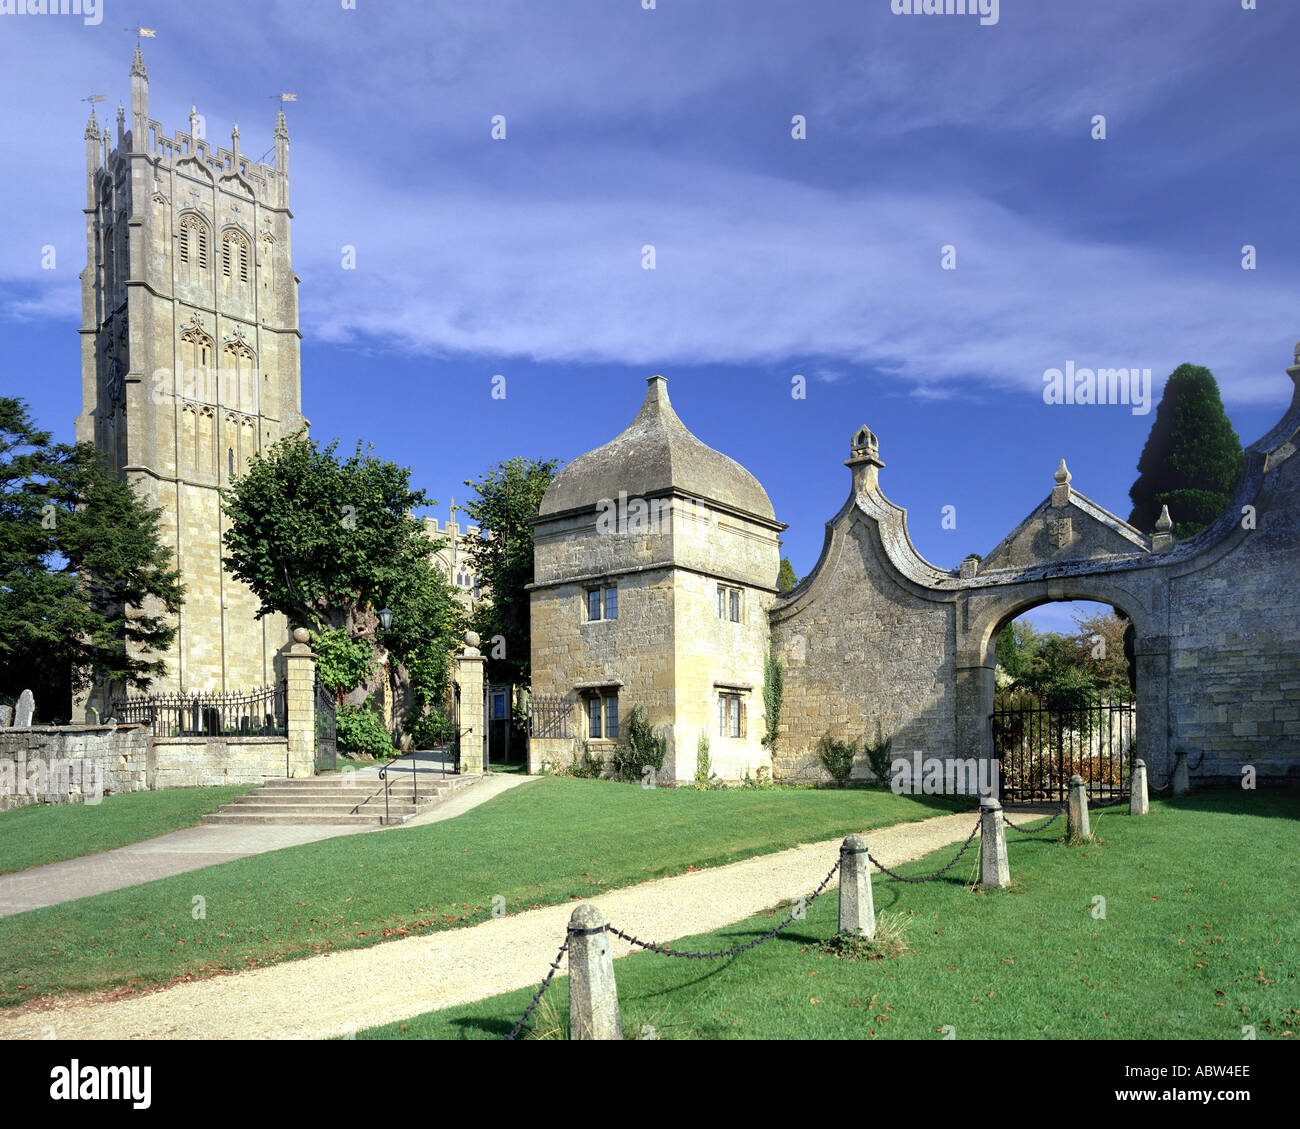 GB - GLOUCESTERSHIRE: Chipping Campden in the Cotswolds Stock Photo